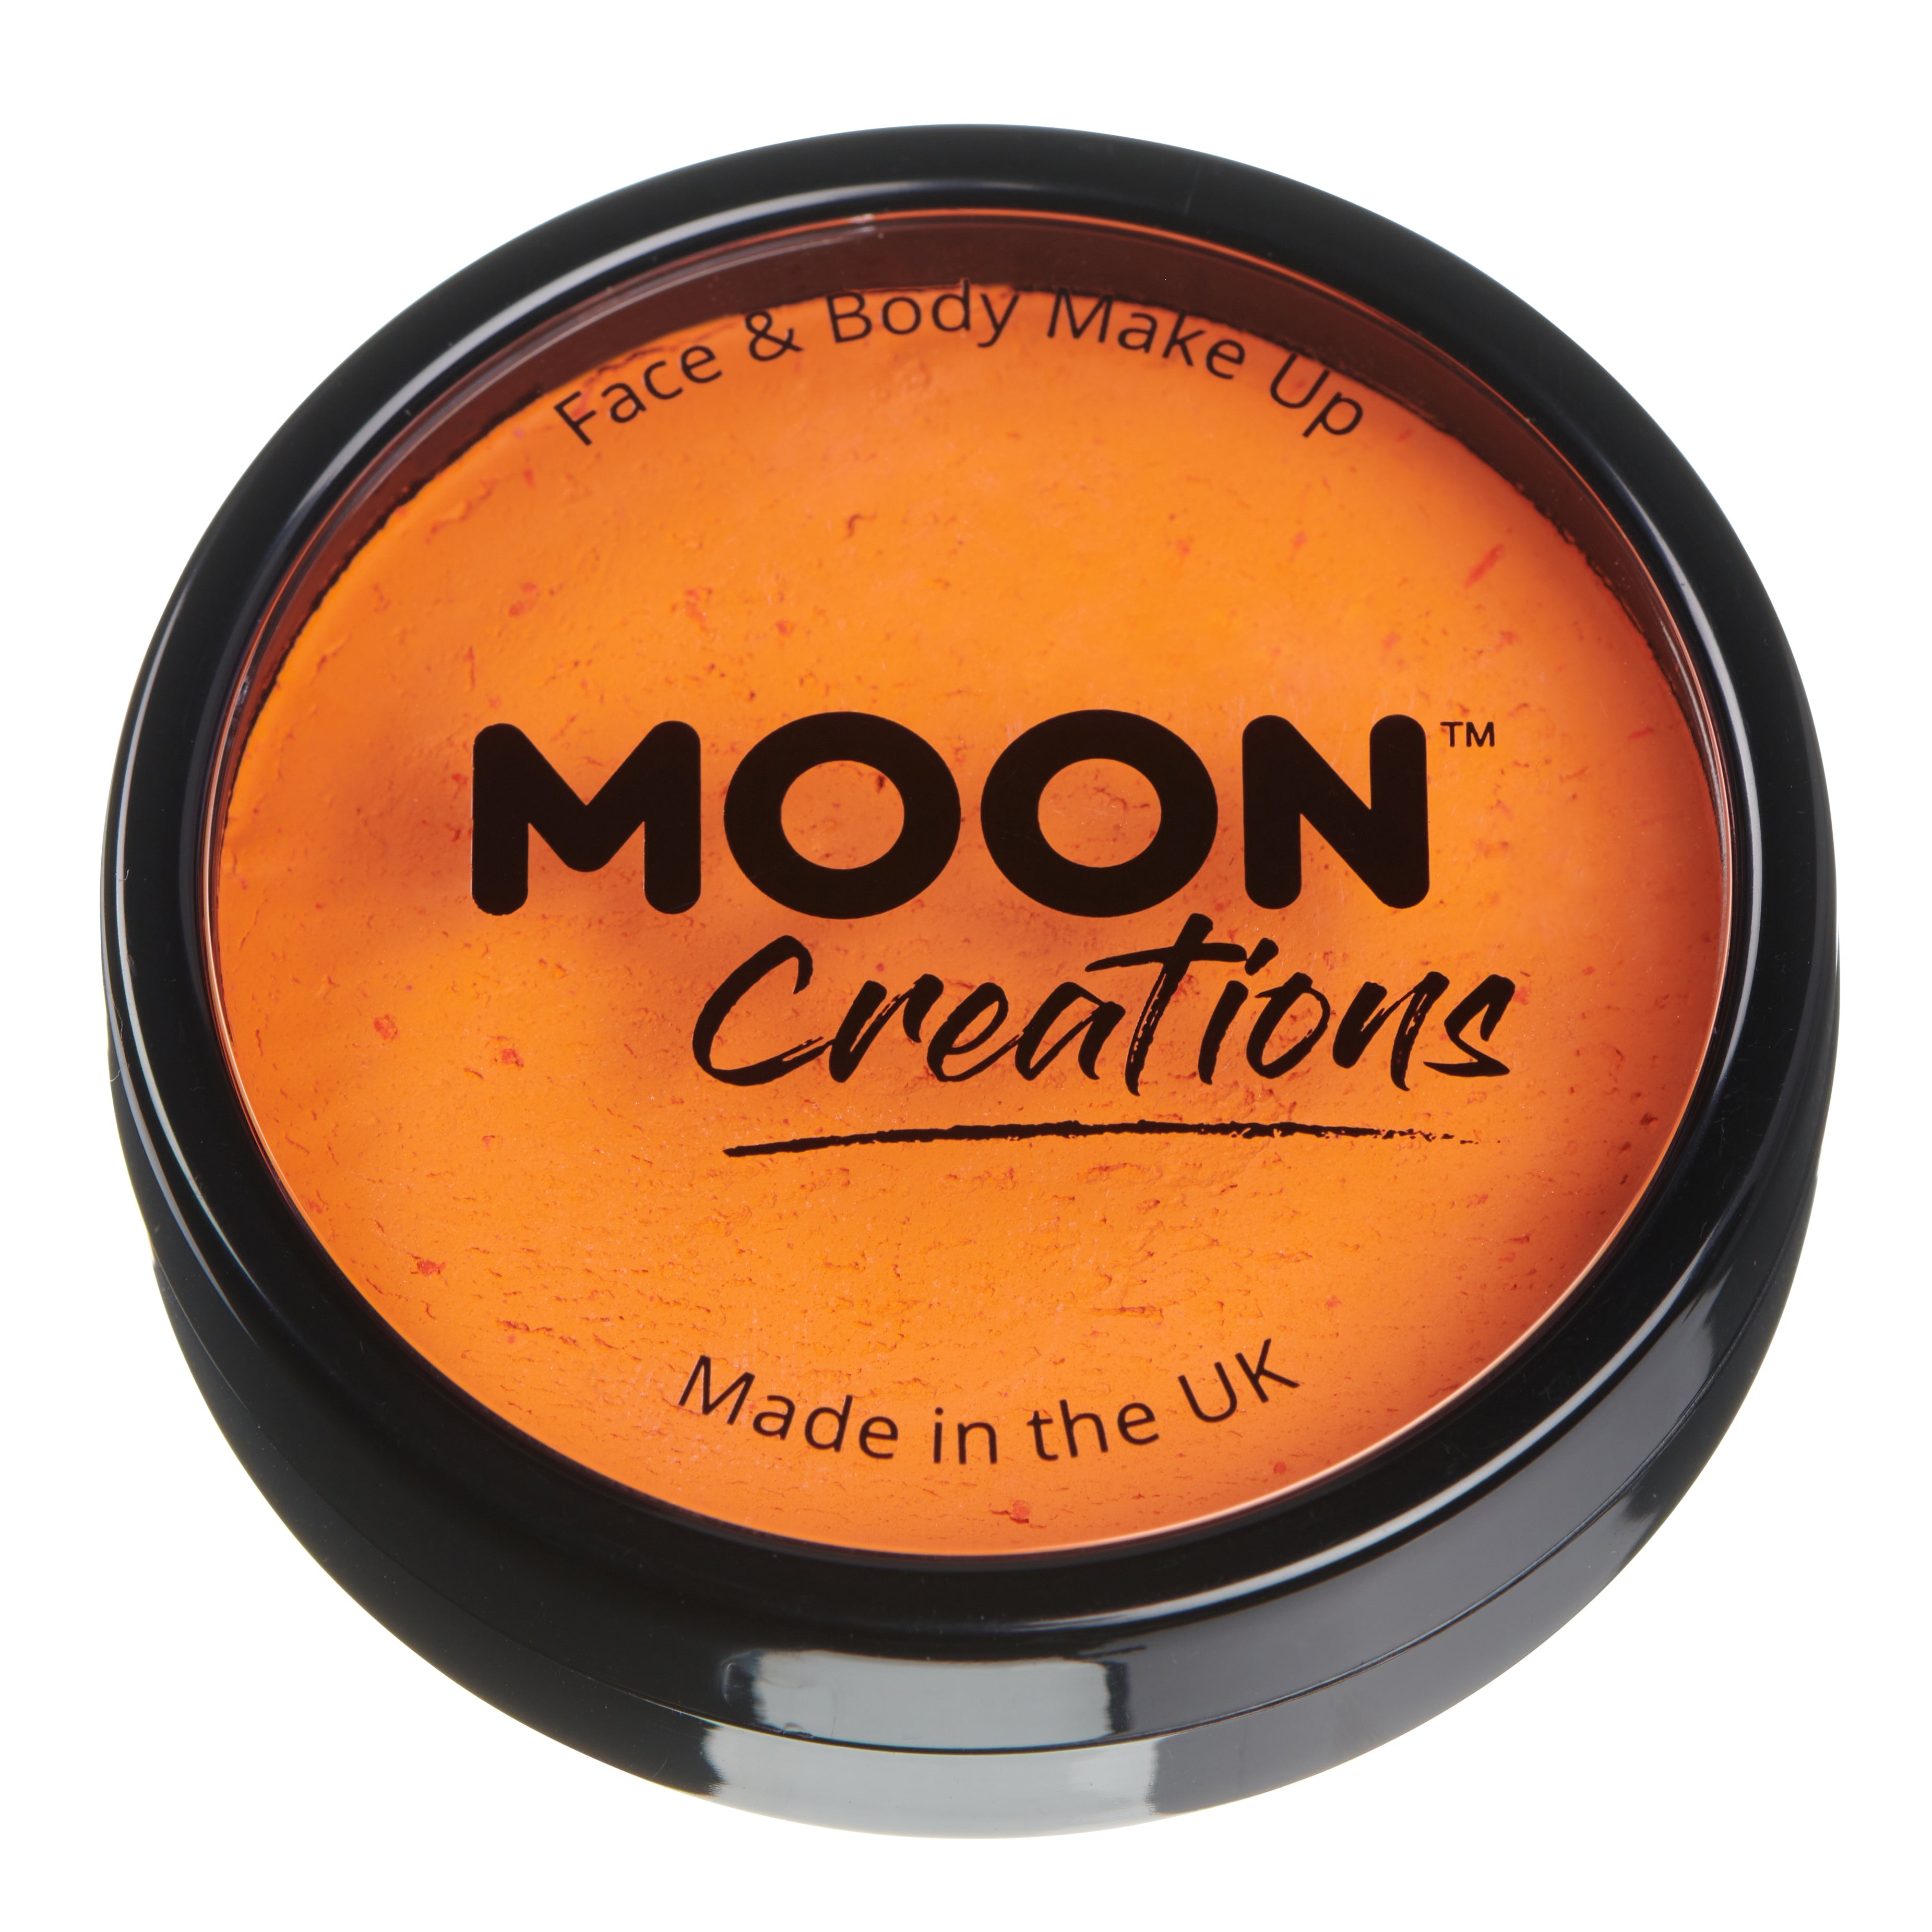 Bright Orange - Professional Face Paint, 36g. Cosmetically certified, FDA & Health Canada compliant, cruelty free and vegan.